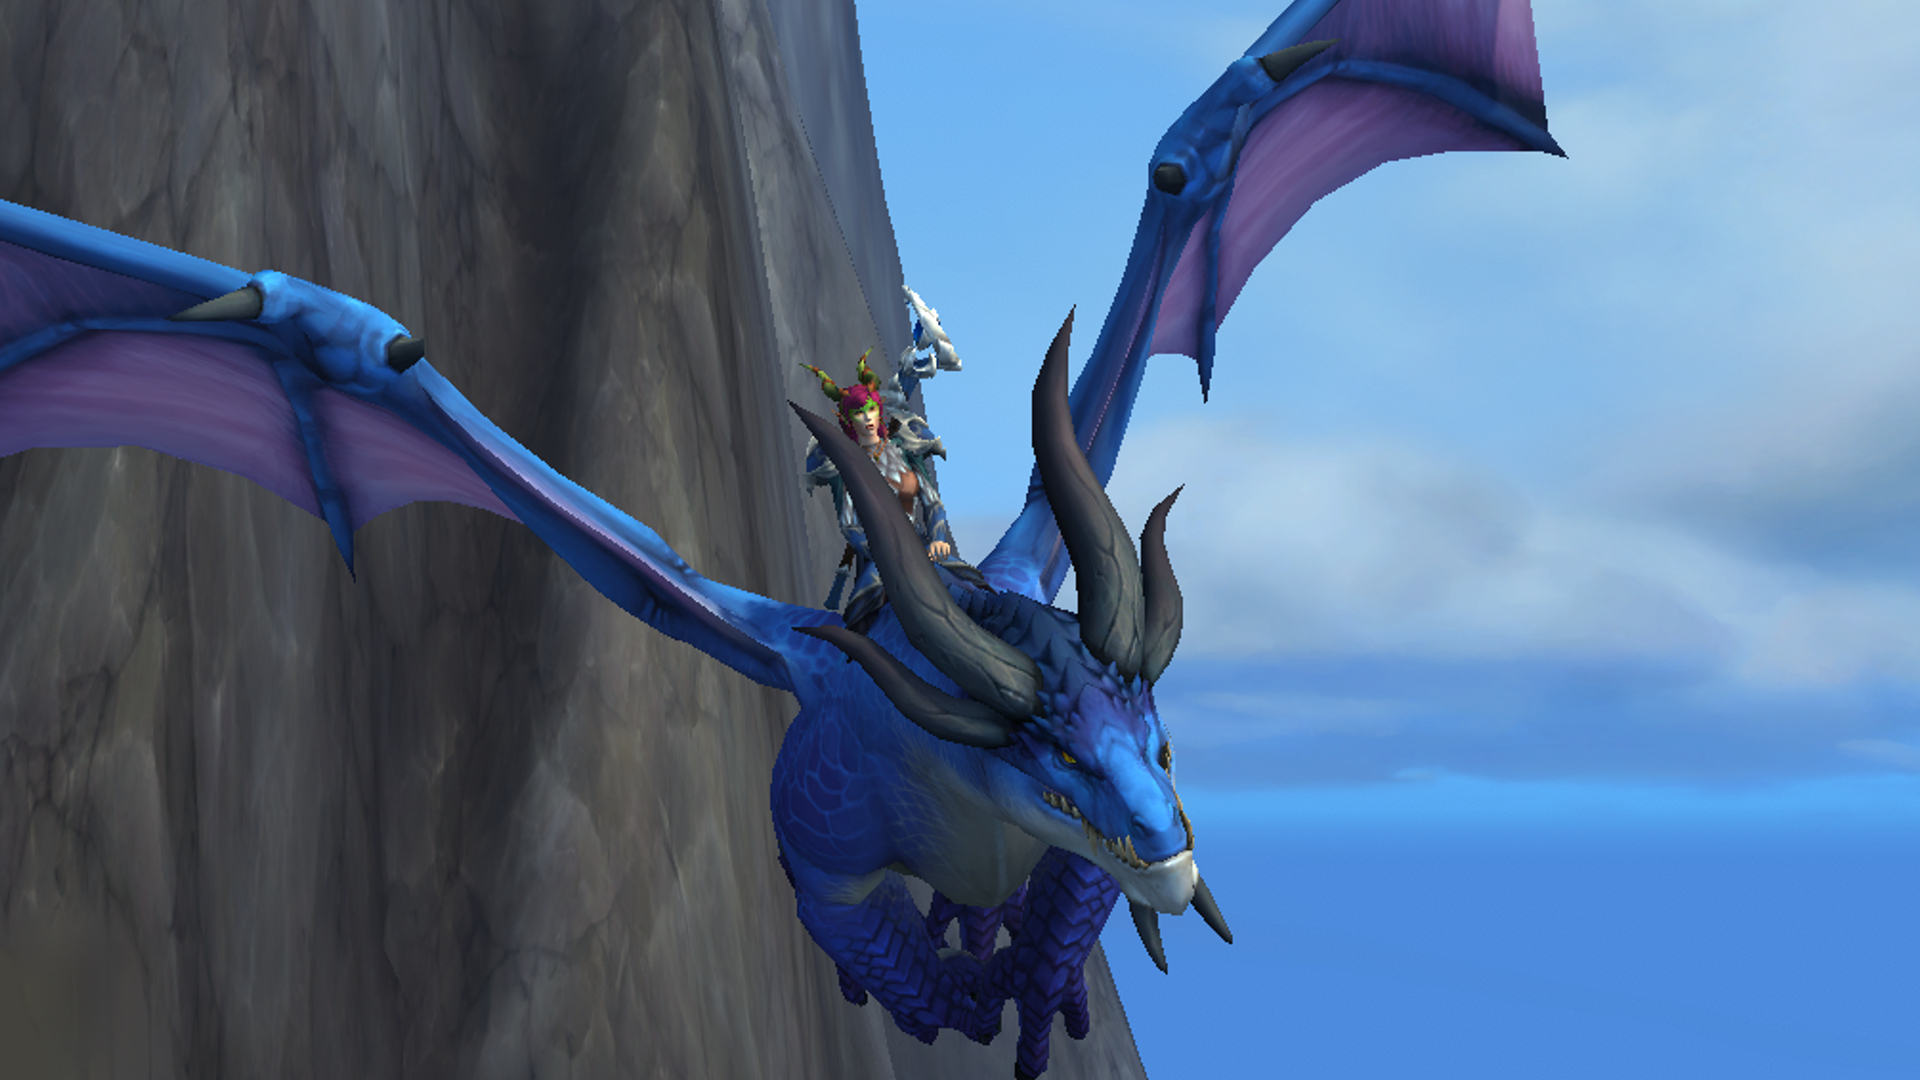 WoW Dragonflight alpha preview – The new life World of Warcraft needs